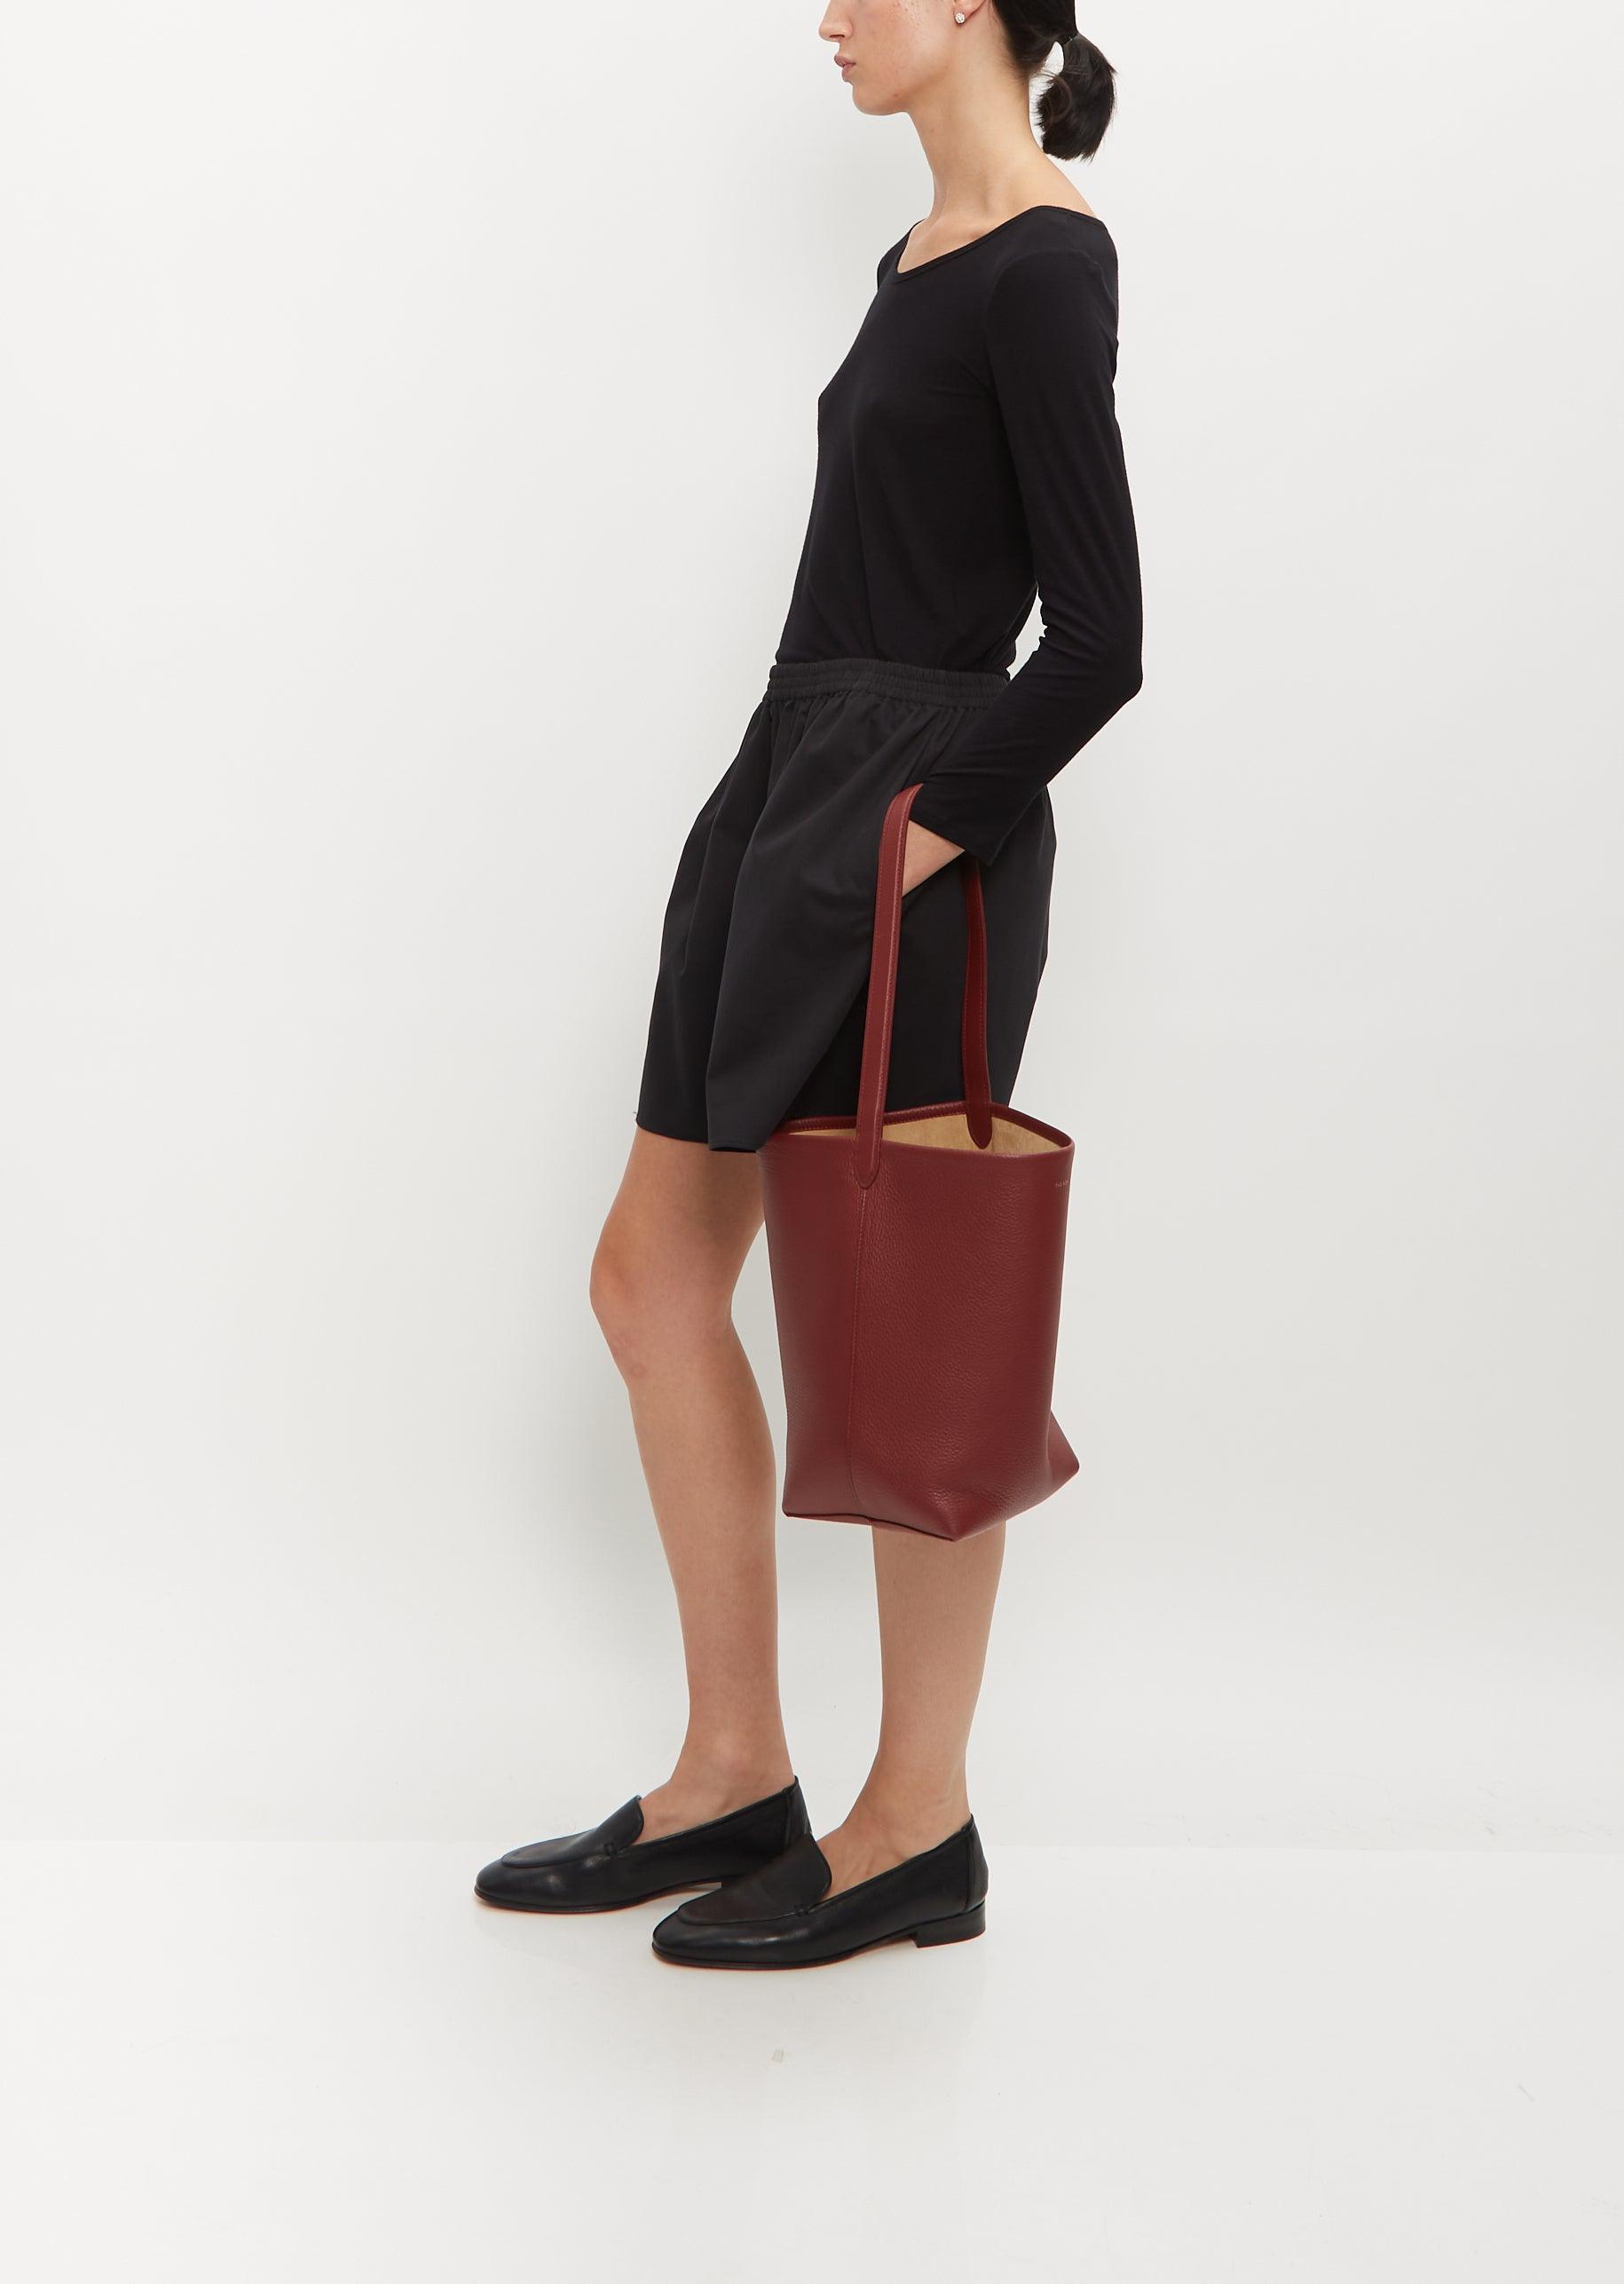 Park Medium Leather Tote Bag in Black - The Row